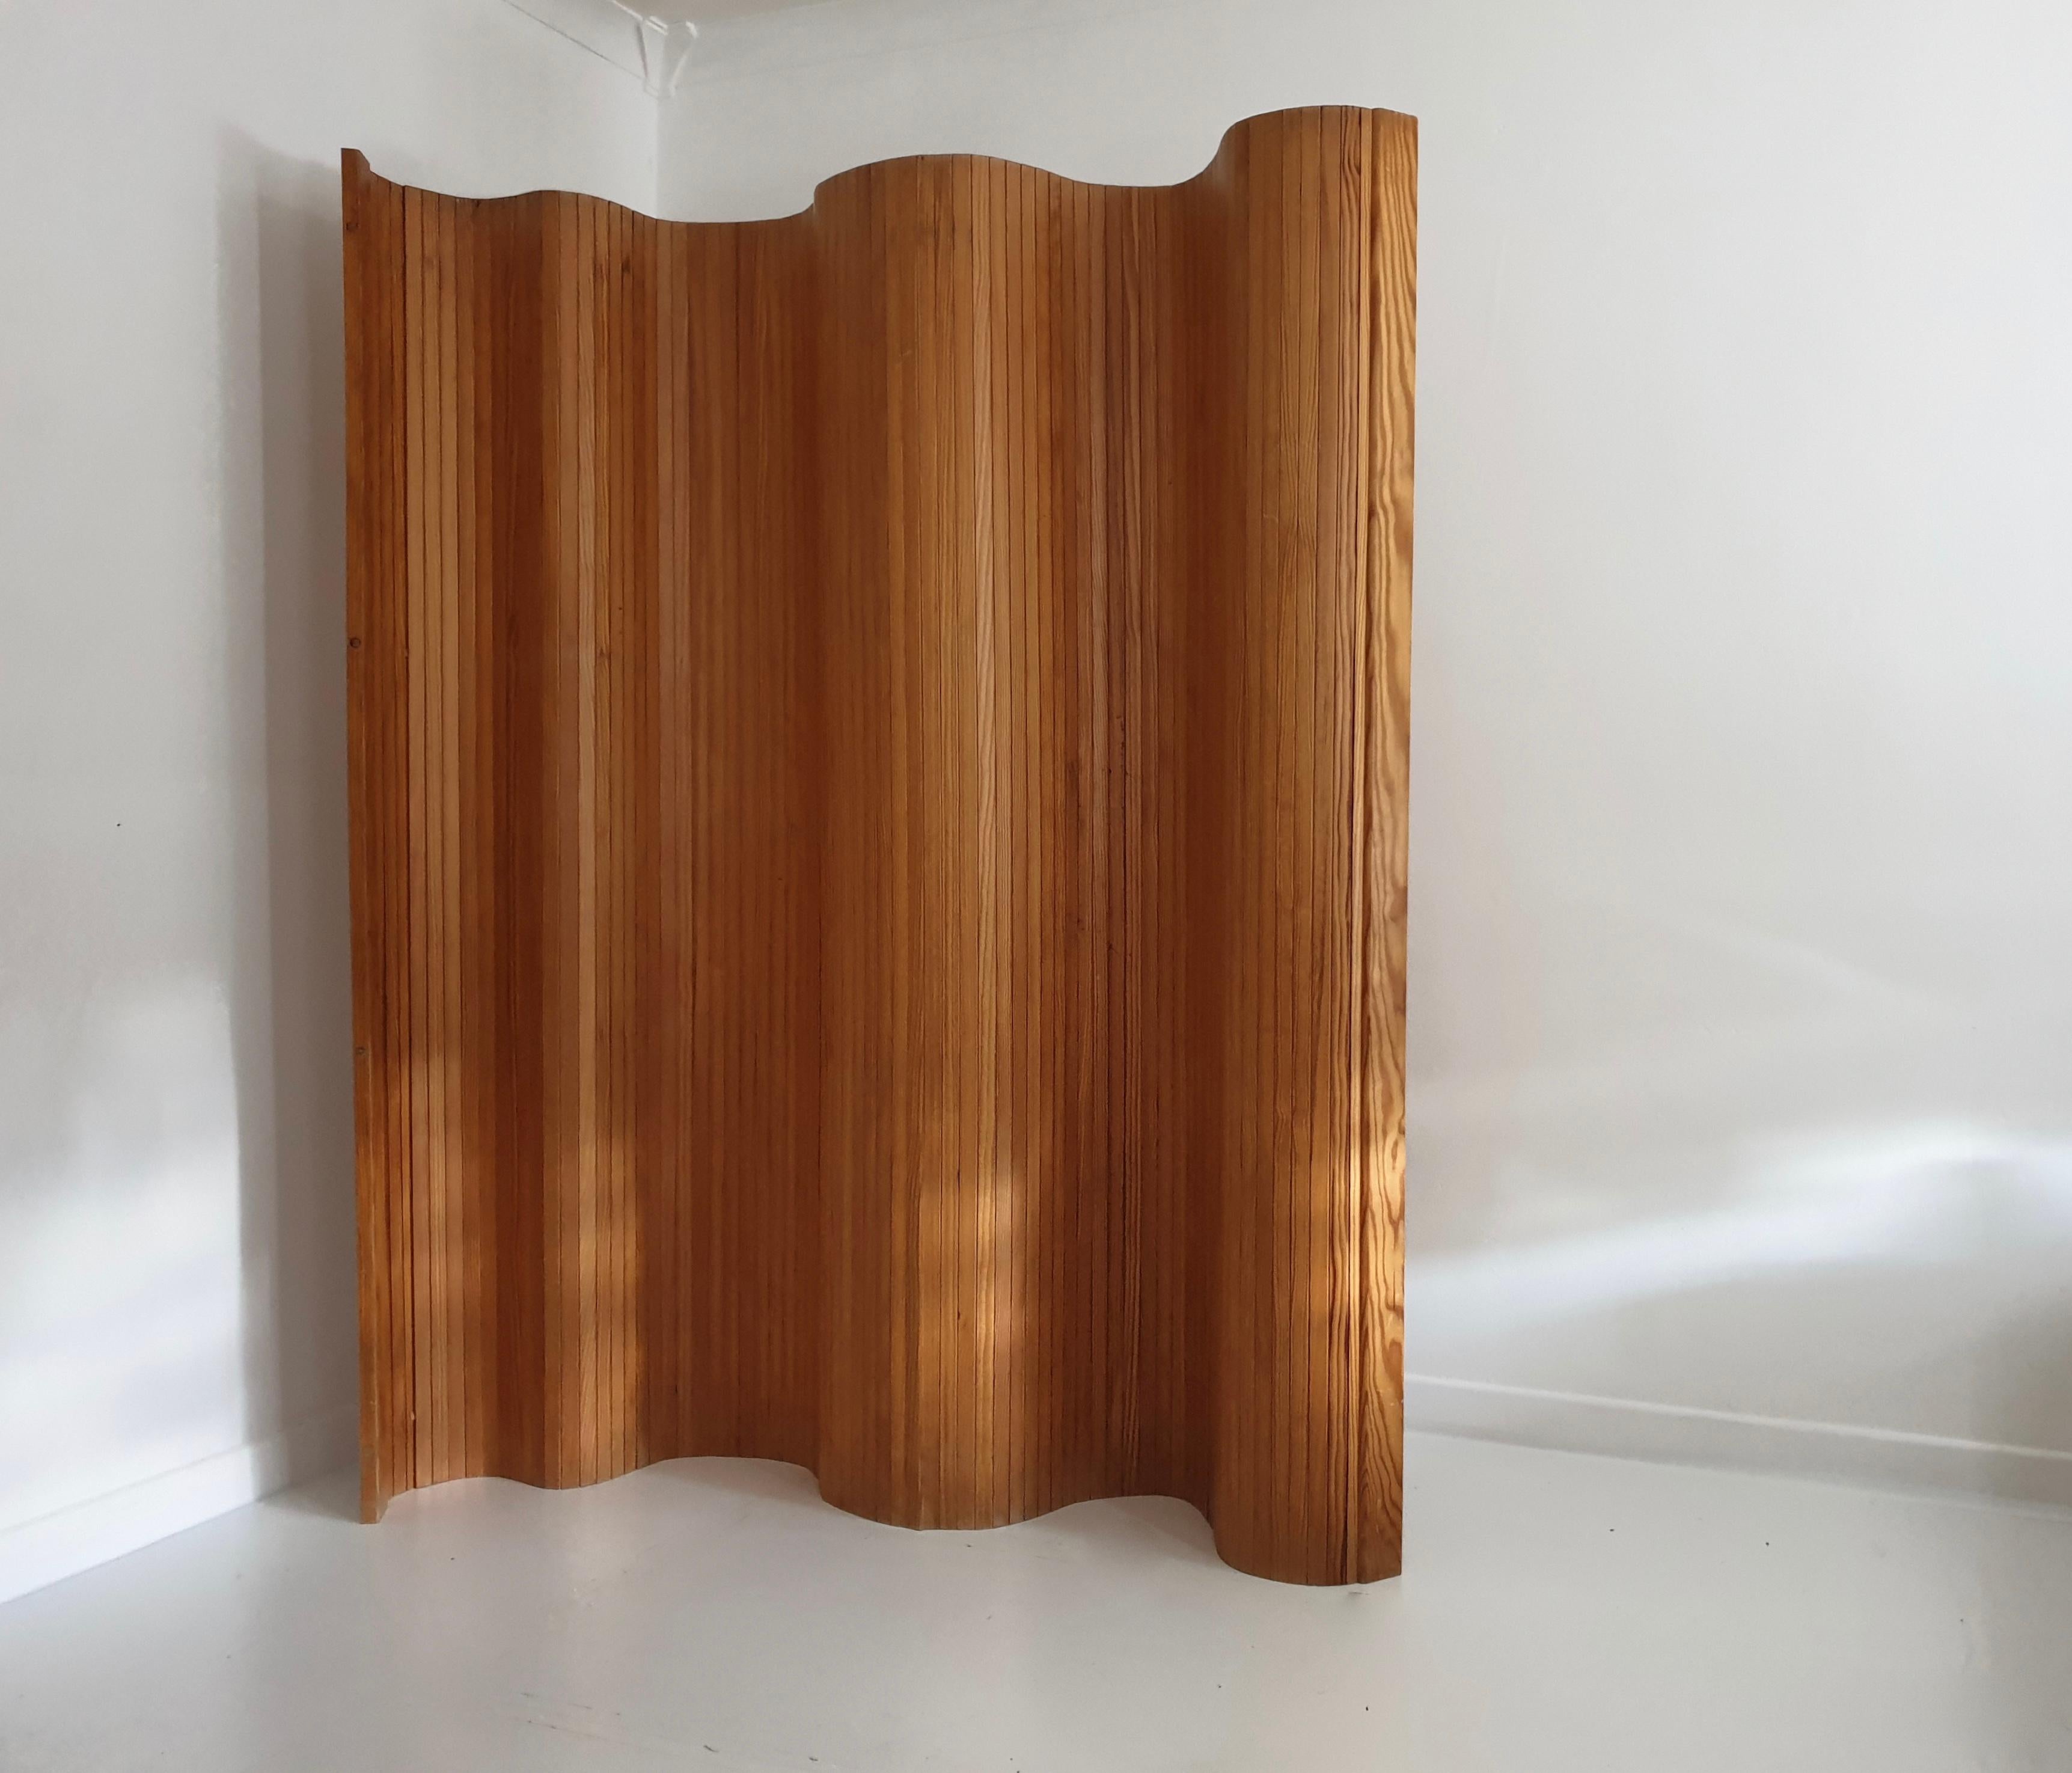 British Pine Tambour Room Divider / Screen in the Manner of Aalto by Habitat, circa 1980